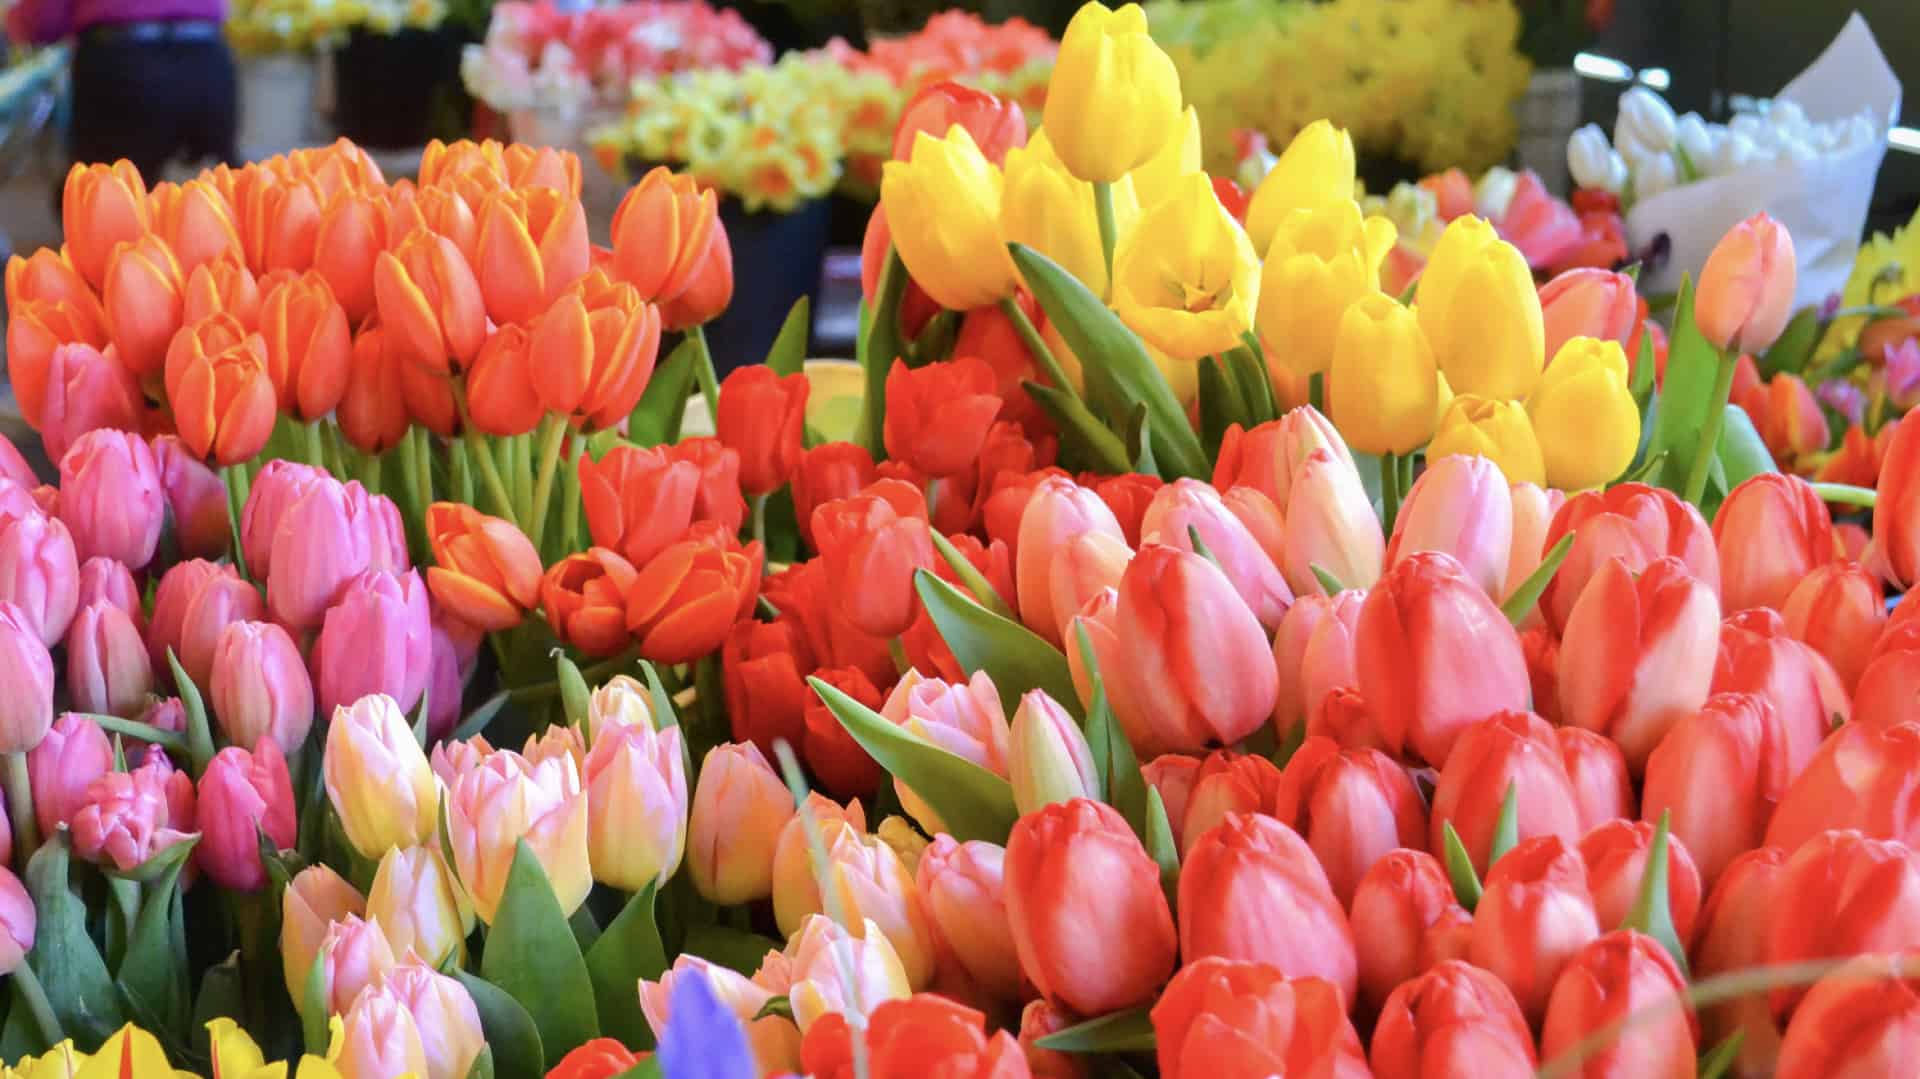 tulips and daffodil flowers sit on a table at a farmers market